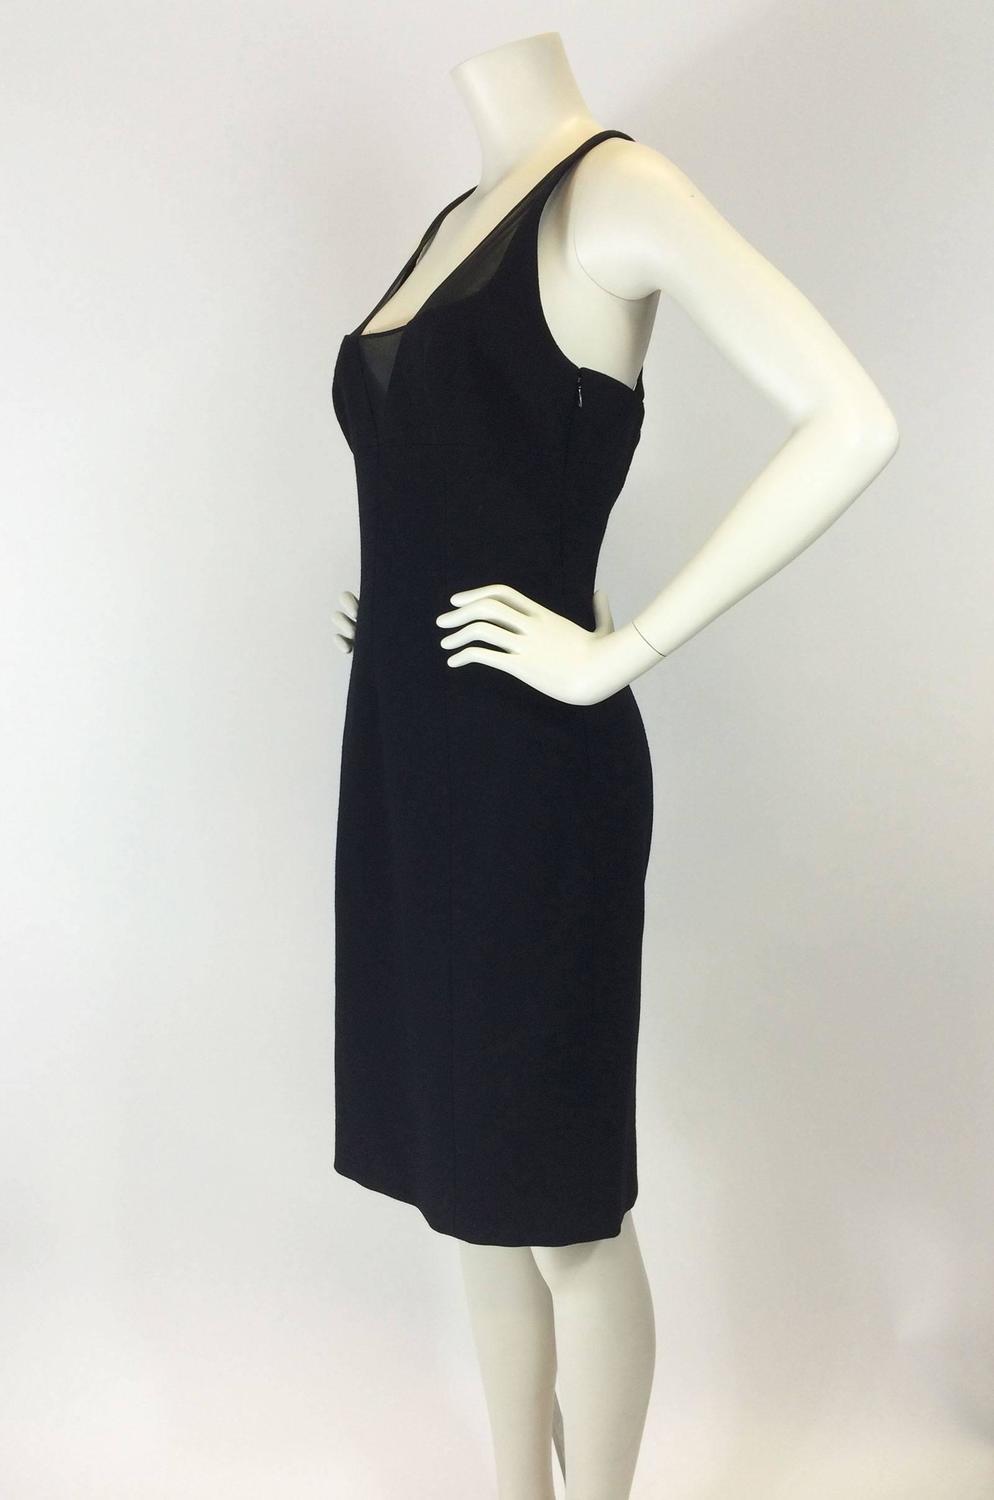 Gianni Versace Black Bodycon Cocktail Dress at 1stdibs